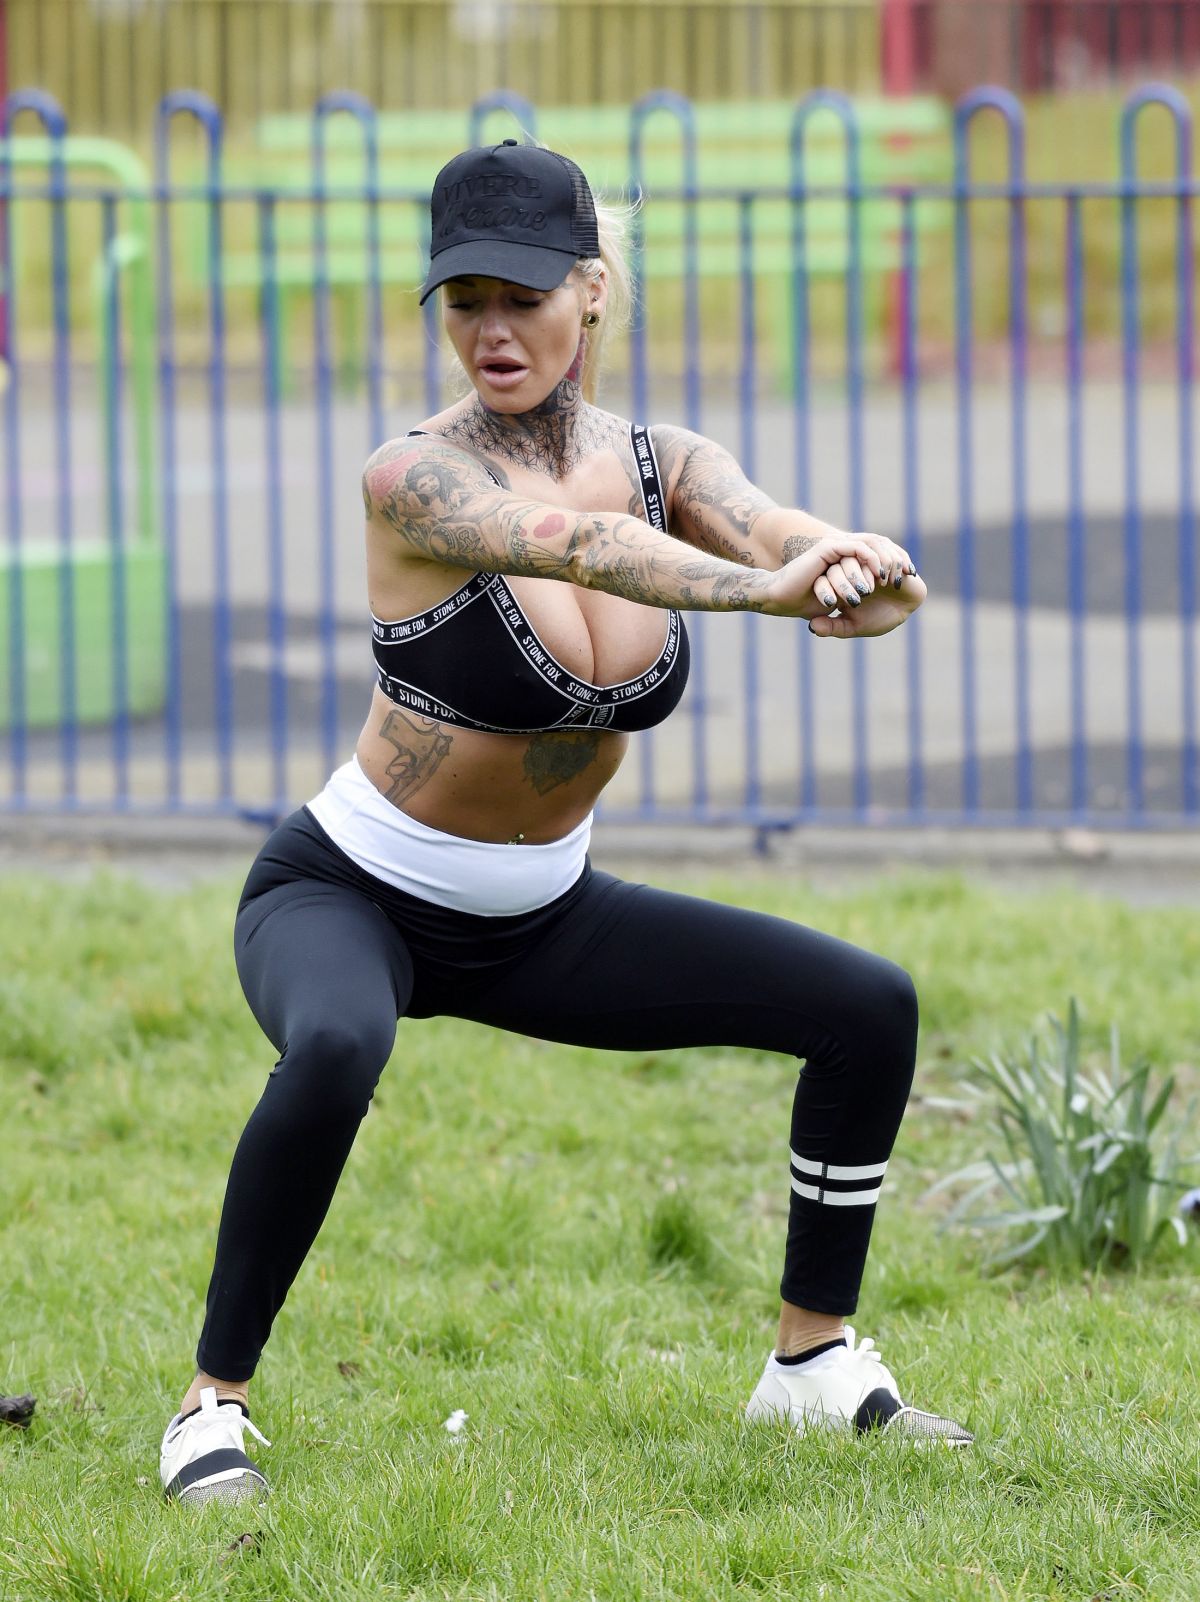 jemma-lucy-working-out-at-a-park-in-manchester-03-28-2016_5.jpg